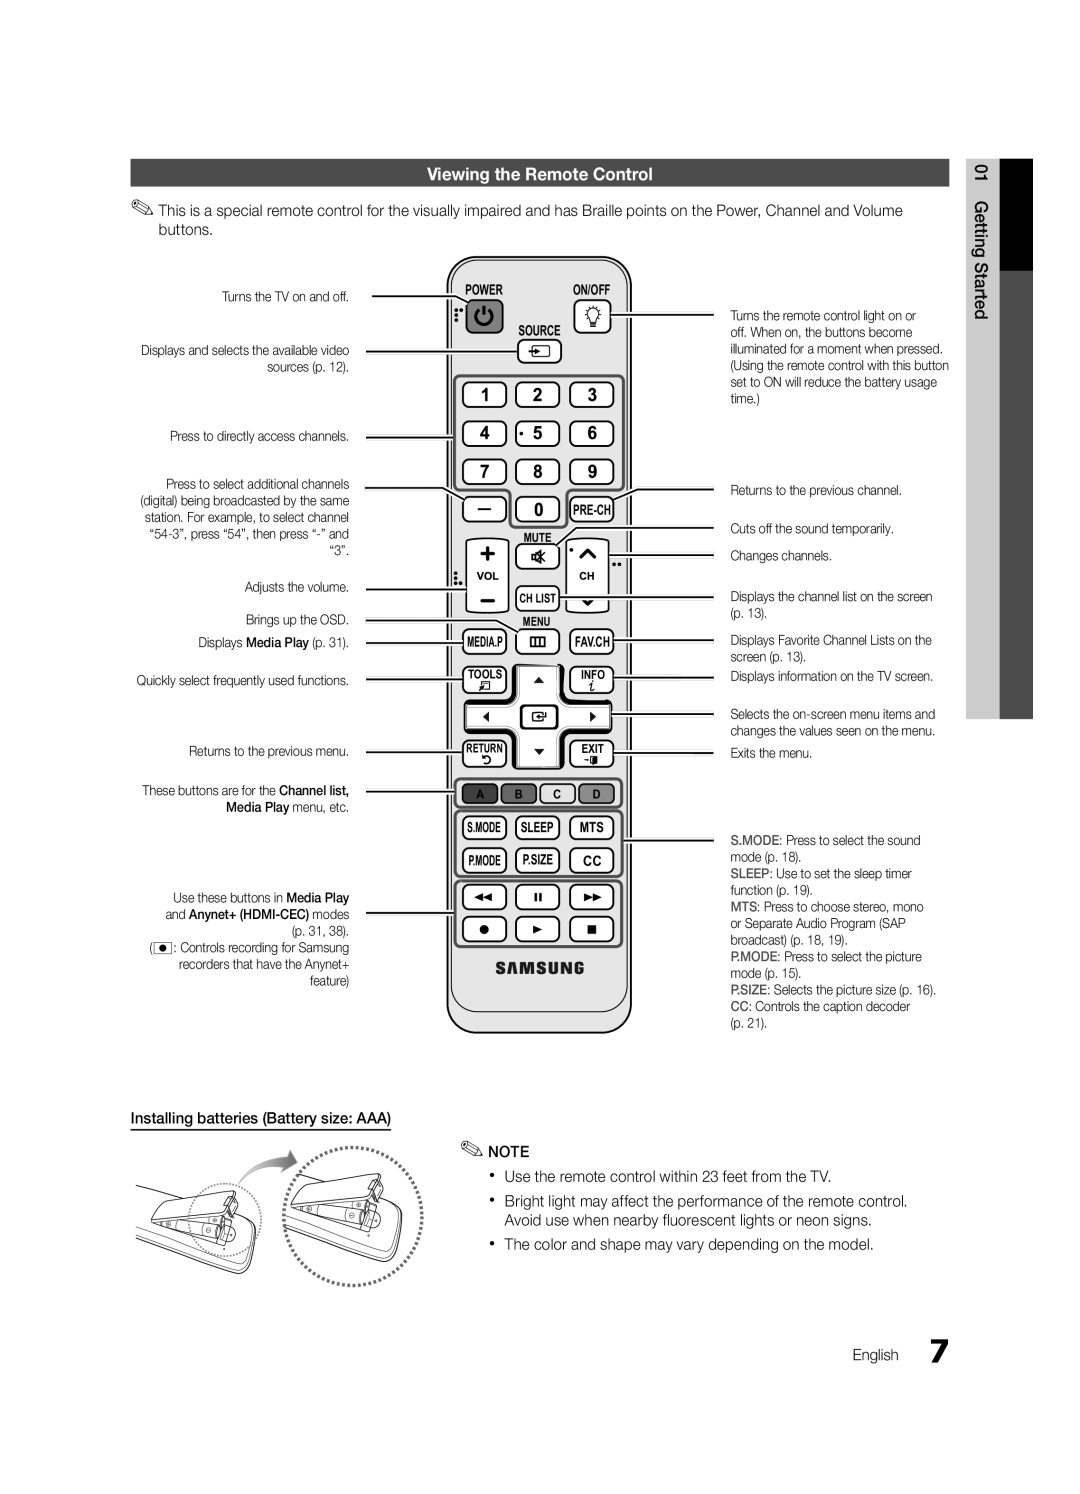 Samsung UC6300-ZC user manual Viewing the Remote Control, Installing batteries Battery size AAA, Power On/Off Source Pre-Ch 